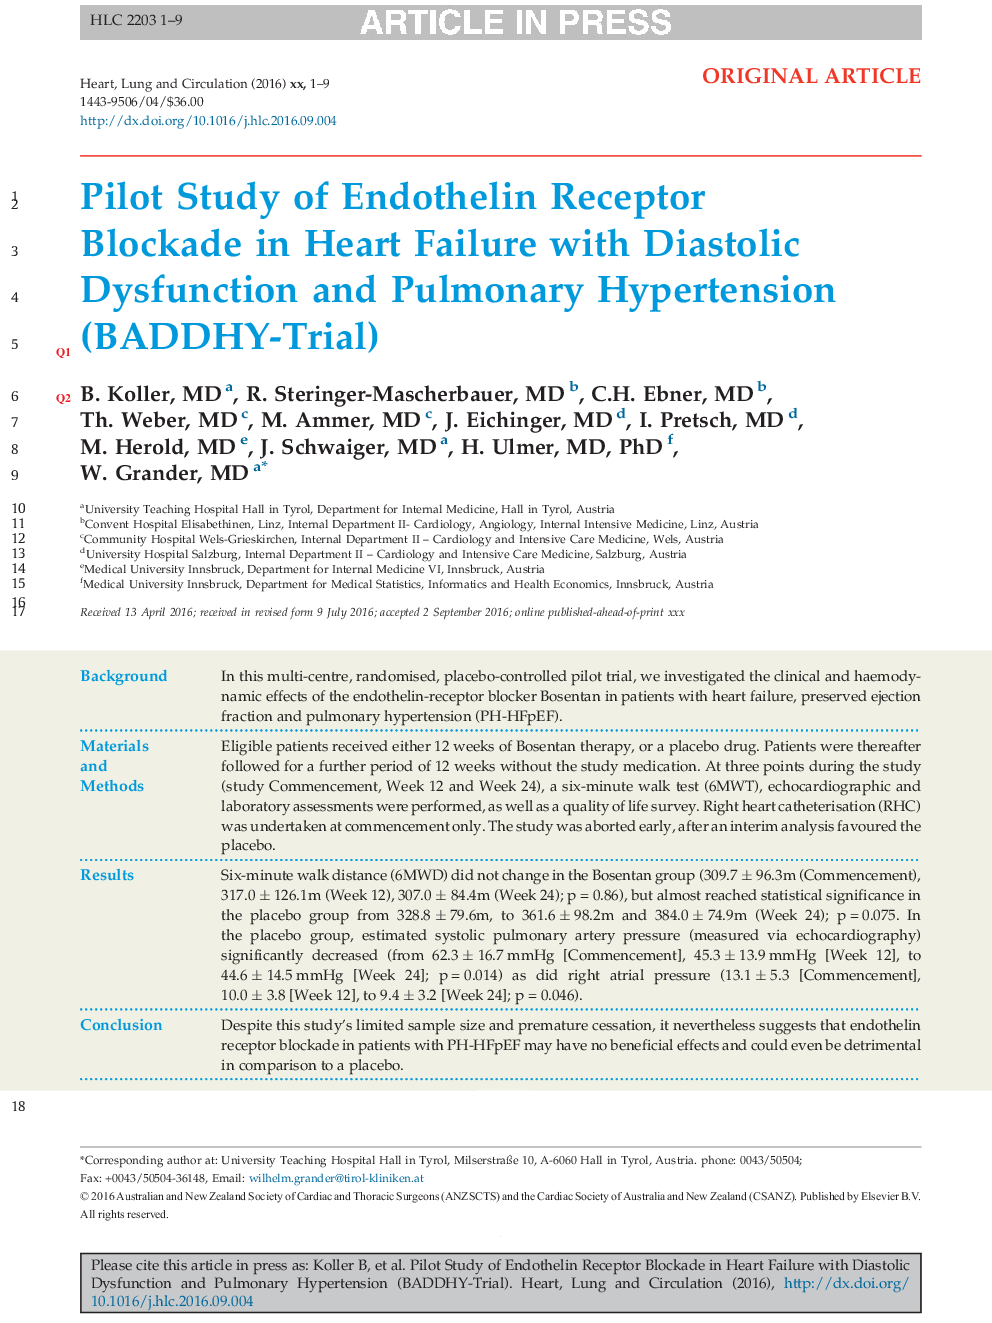 Pilot Study of Endothelin Receptor Blockade in Heart Failure with Diastolic Dysfunction and Pulmonary Hypertension (BADDHY-Trial)